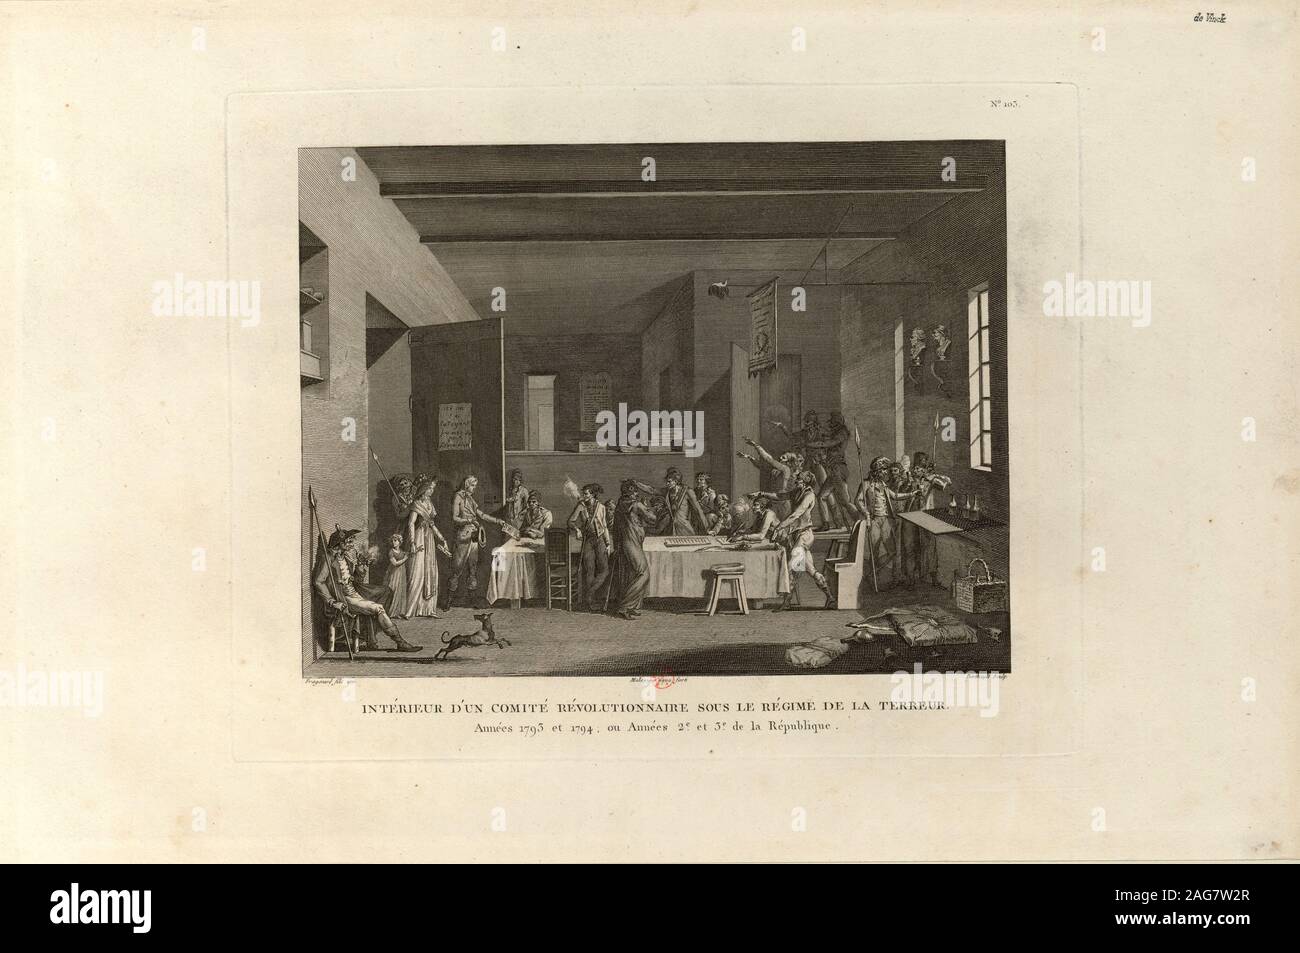 Inside a Revolutionary Committee during the Reign of Terror, 1802. Found in the Collection of Biblioth&#xe8;que Nationale de France. Stock Photo